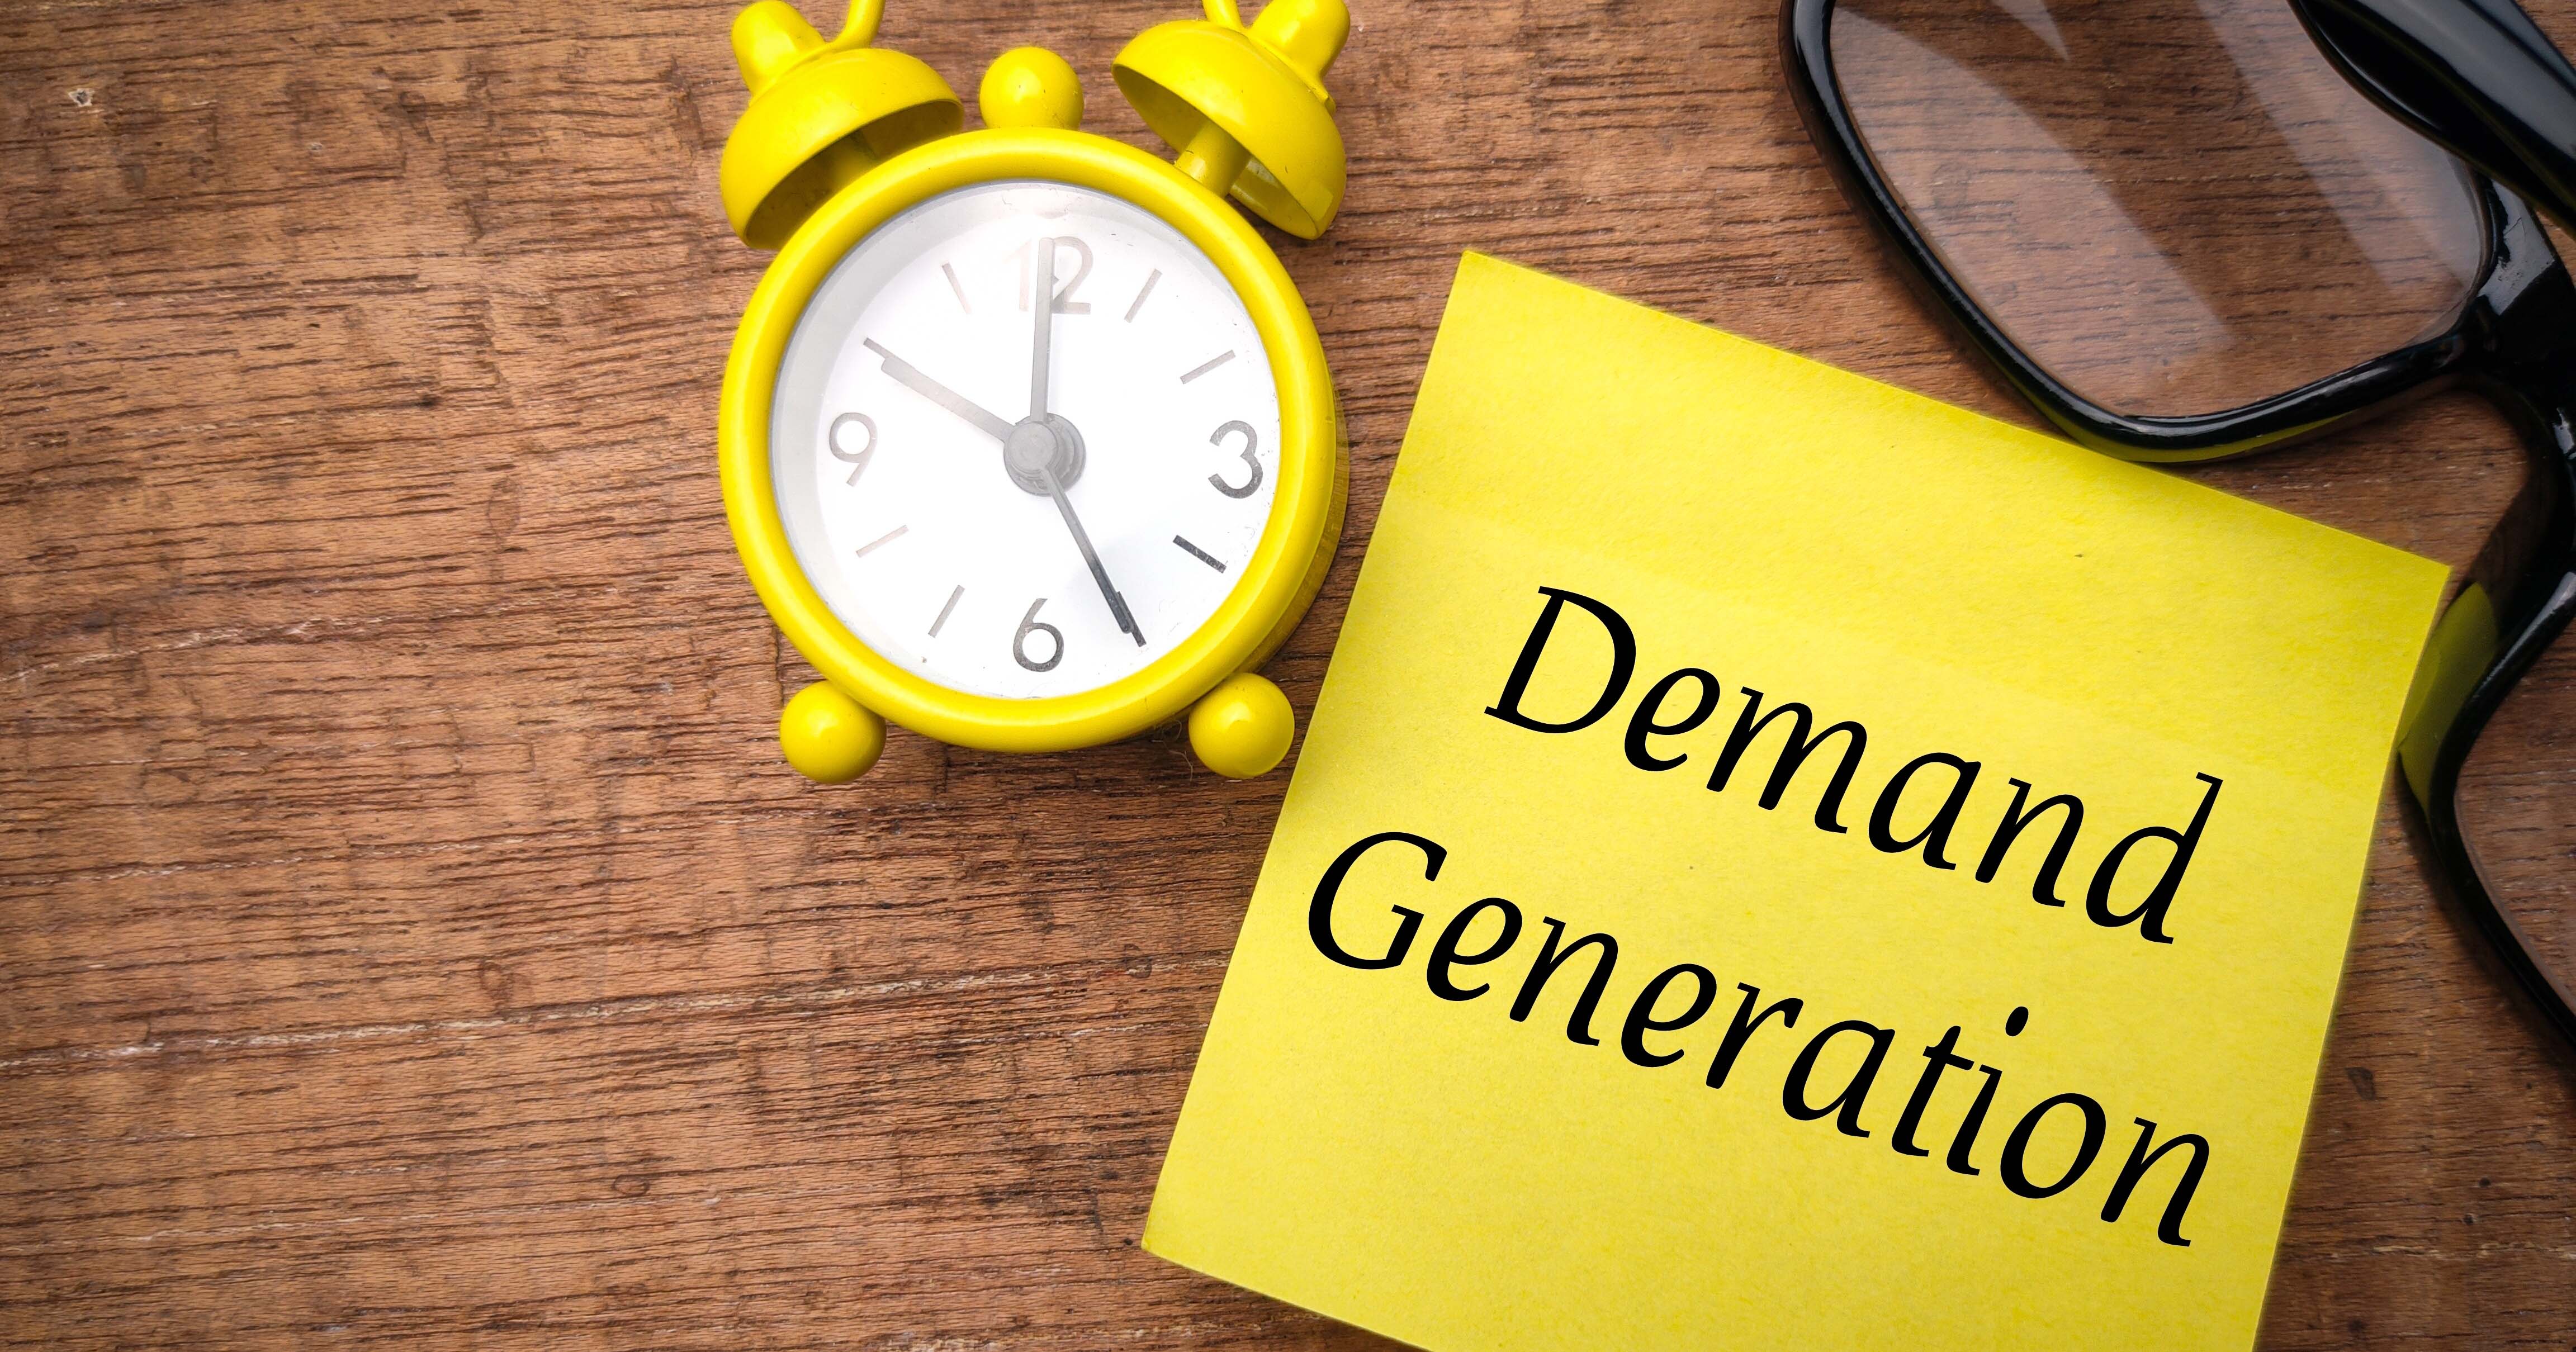 There Is No Demand Generation